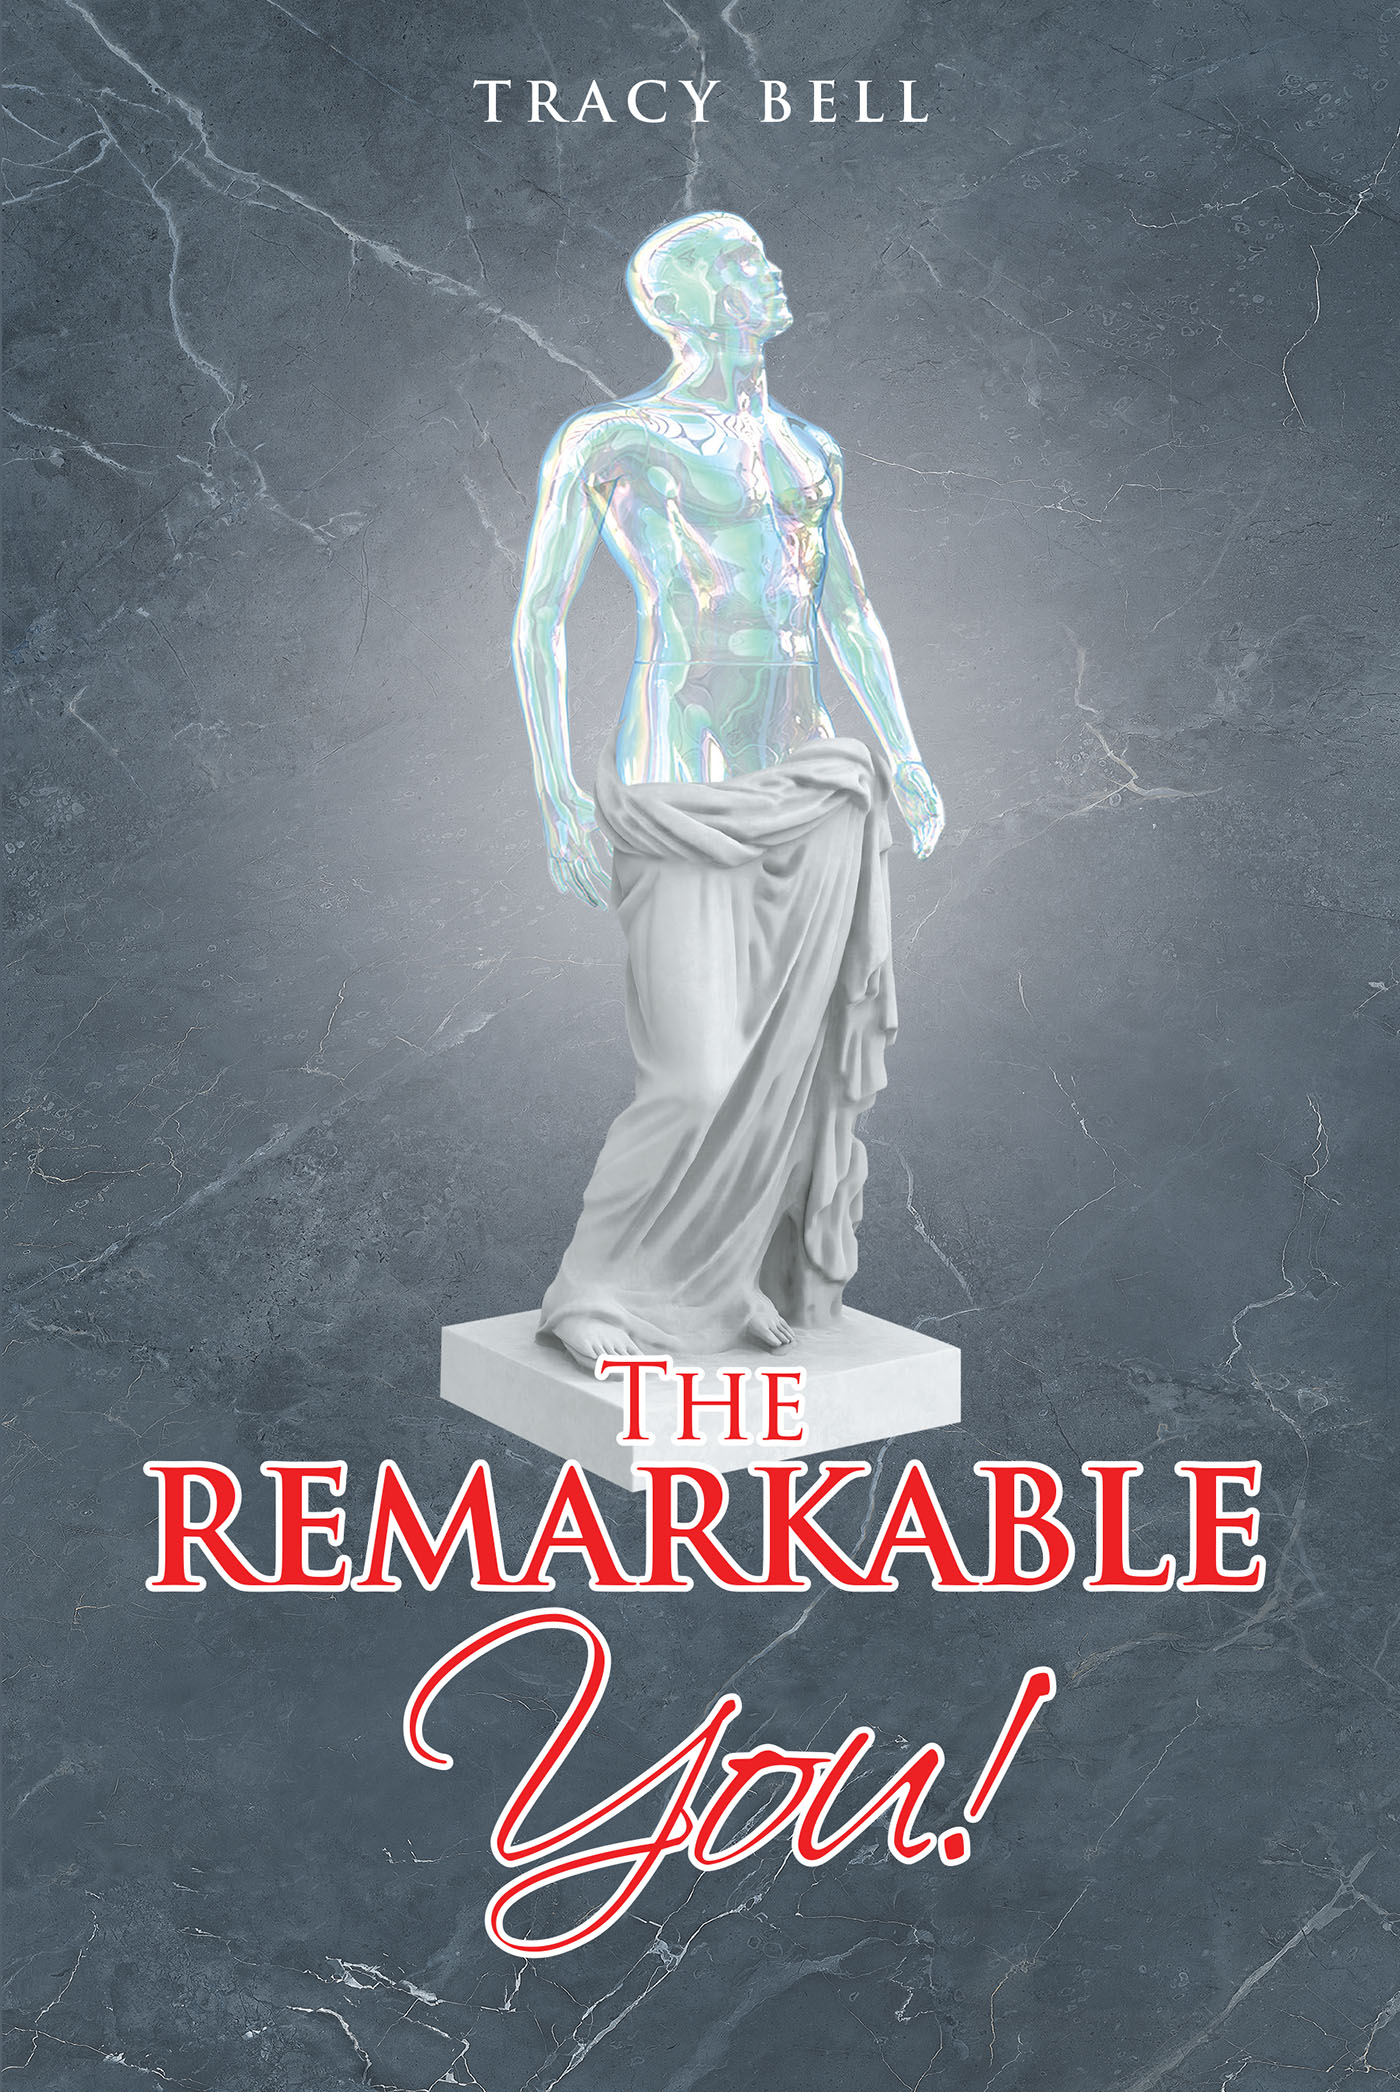 Tracy Bell’s Newly Released "The Remarkable You!" is an Uplifting Opportunity for Personal and Spiritual Reflection, Healing, and Growth